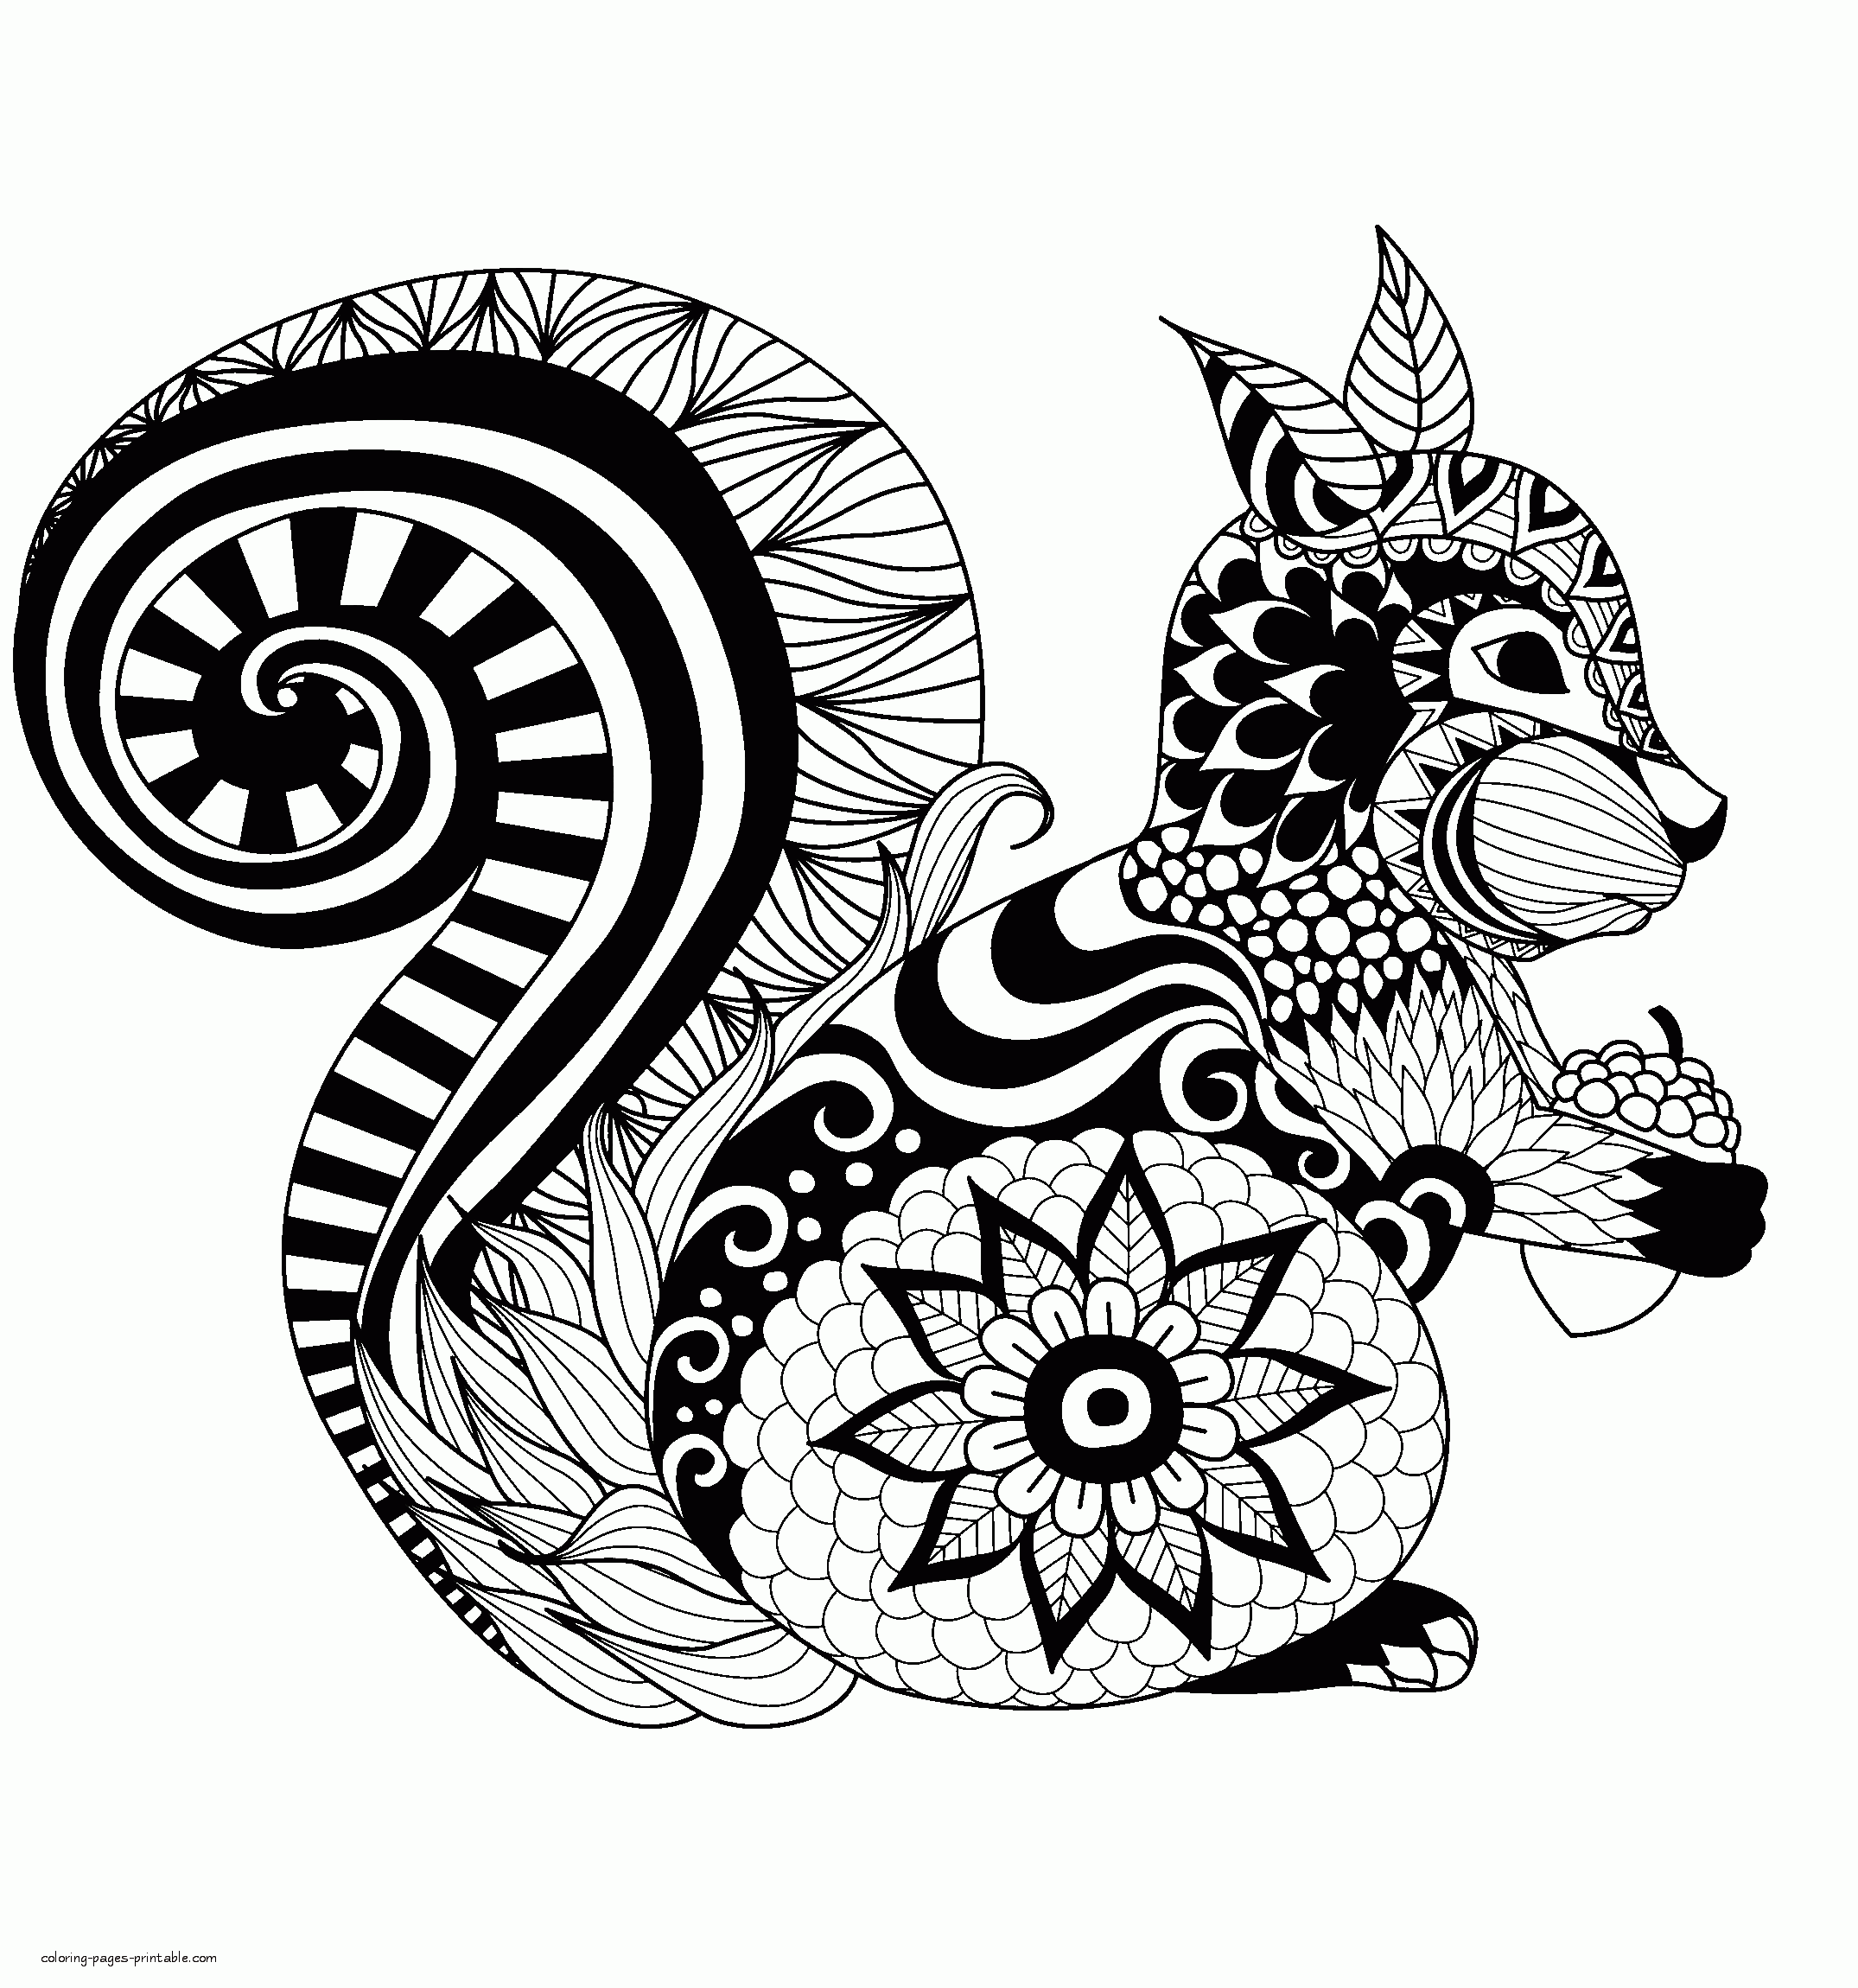 Squirrel. Adult Animal Coloring Sheet || COLORING-PAGES-PRINTABLE.COM